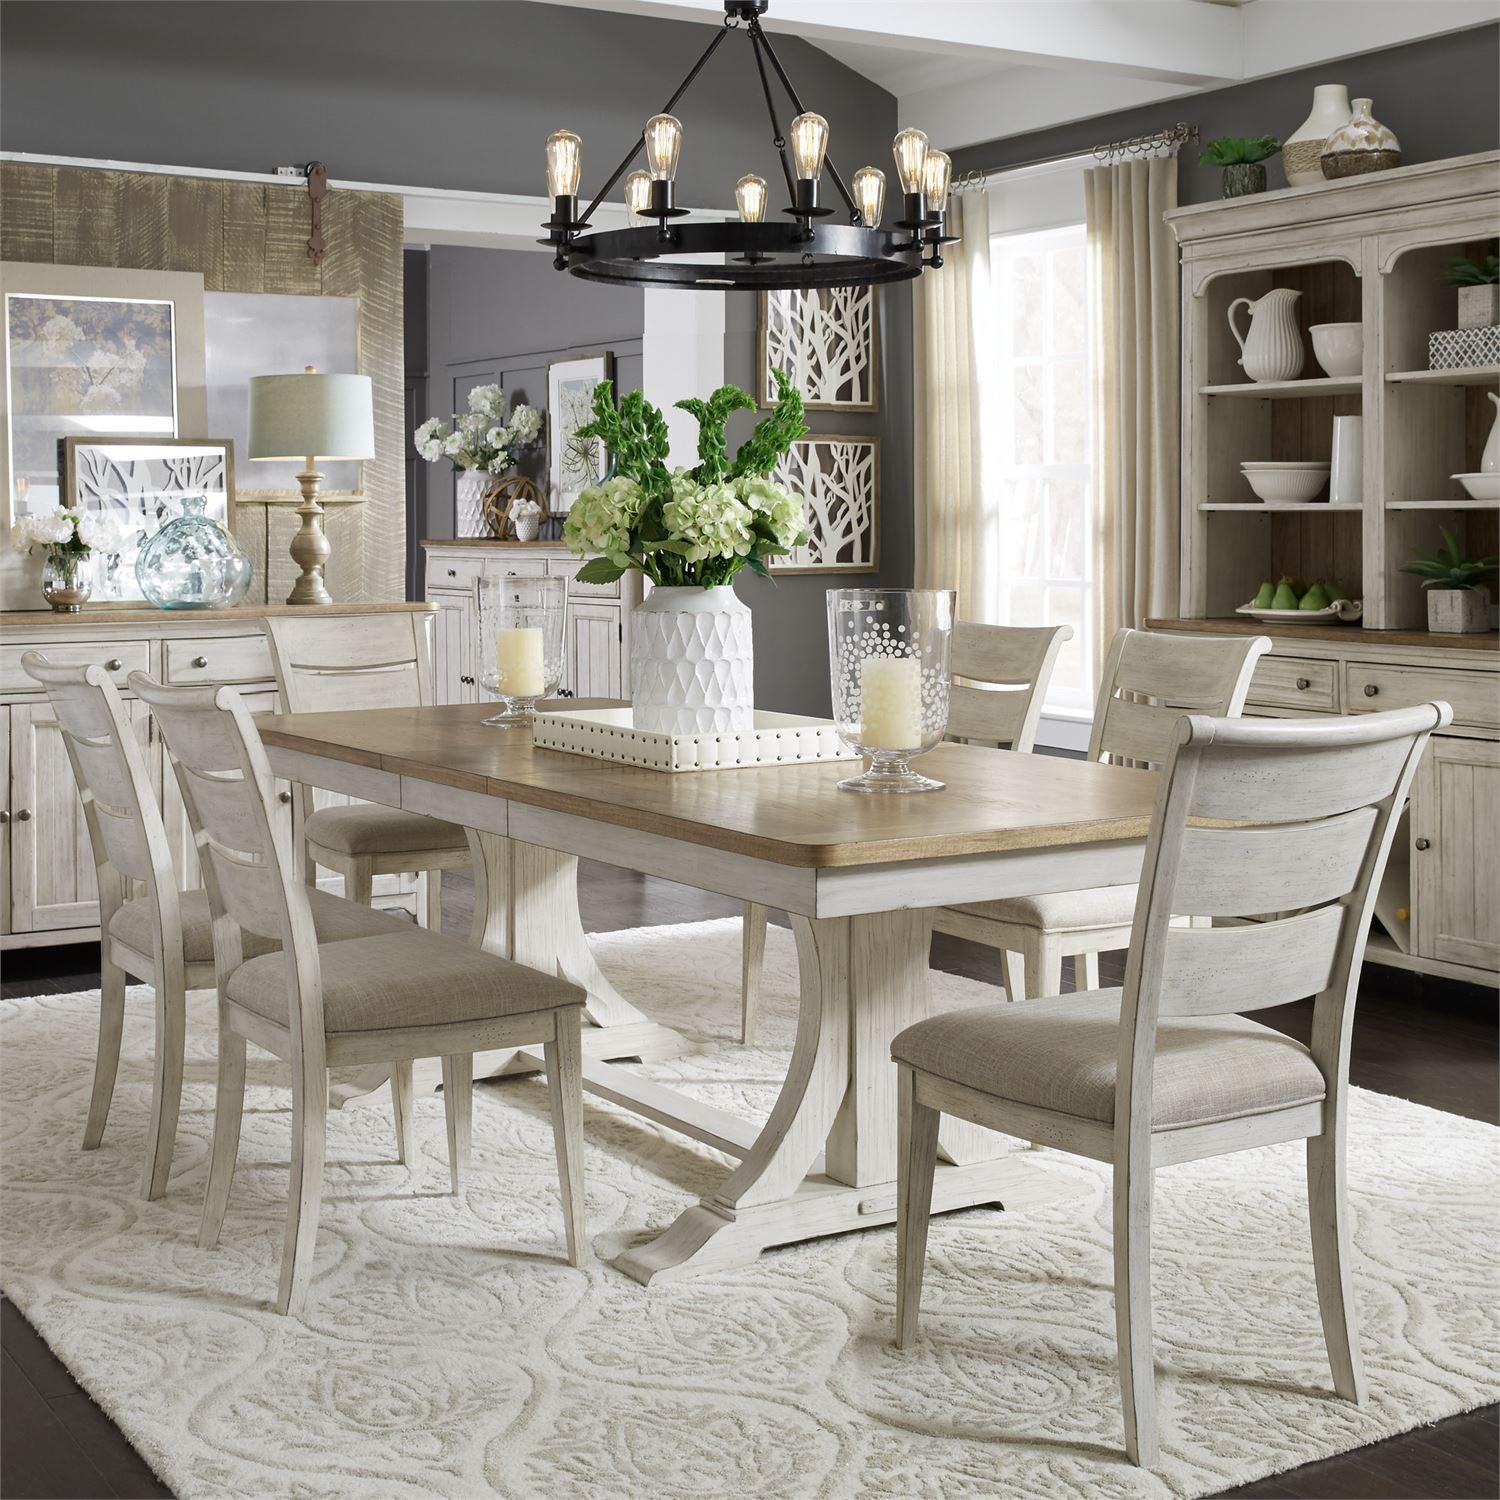 Farmhouse Dining Room Set Farmhouse Reimagined  (652-DR) Dining Room Set 652-DR-O7TRS in White Fabric